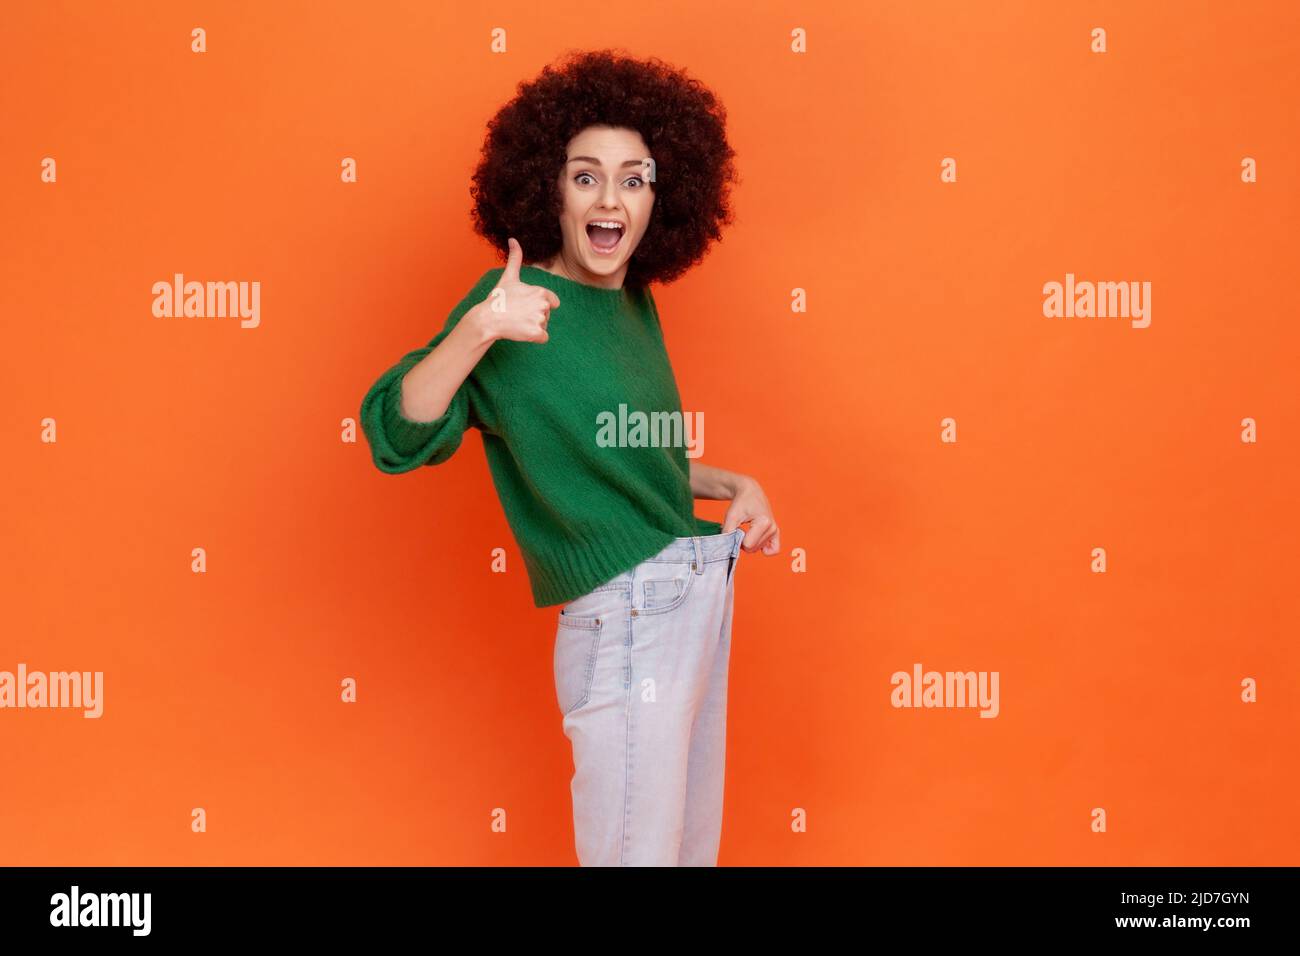 Portrait of positive excited woman with Afro hairstyle wearing green casual style sweater showing slim waist in big trousers and thumbs up. Indoor studio shot isolated on orange background. Stock Photo